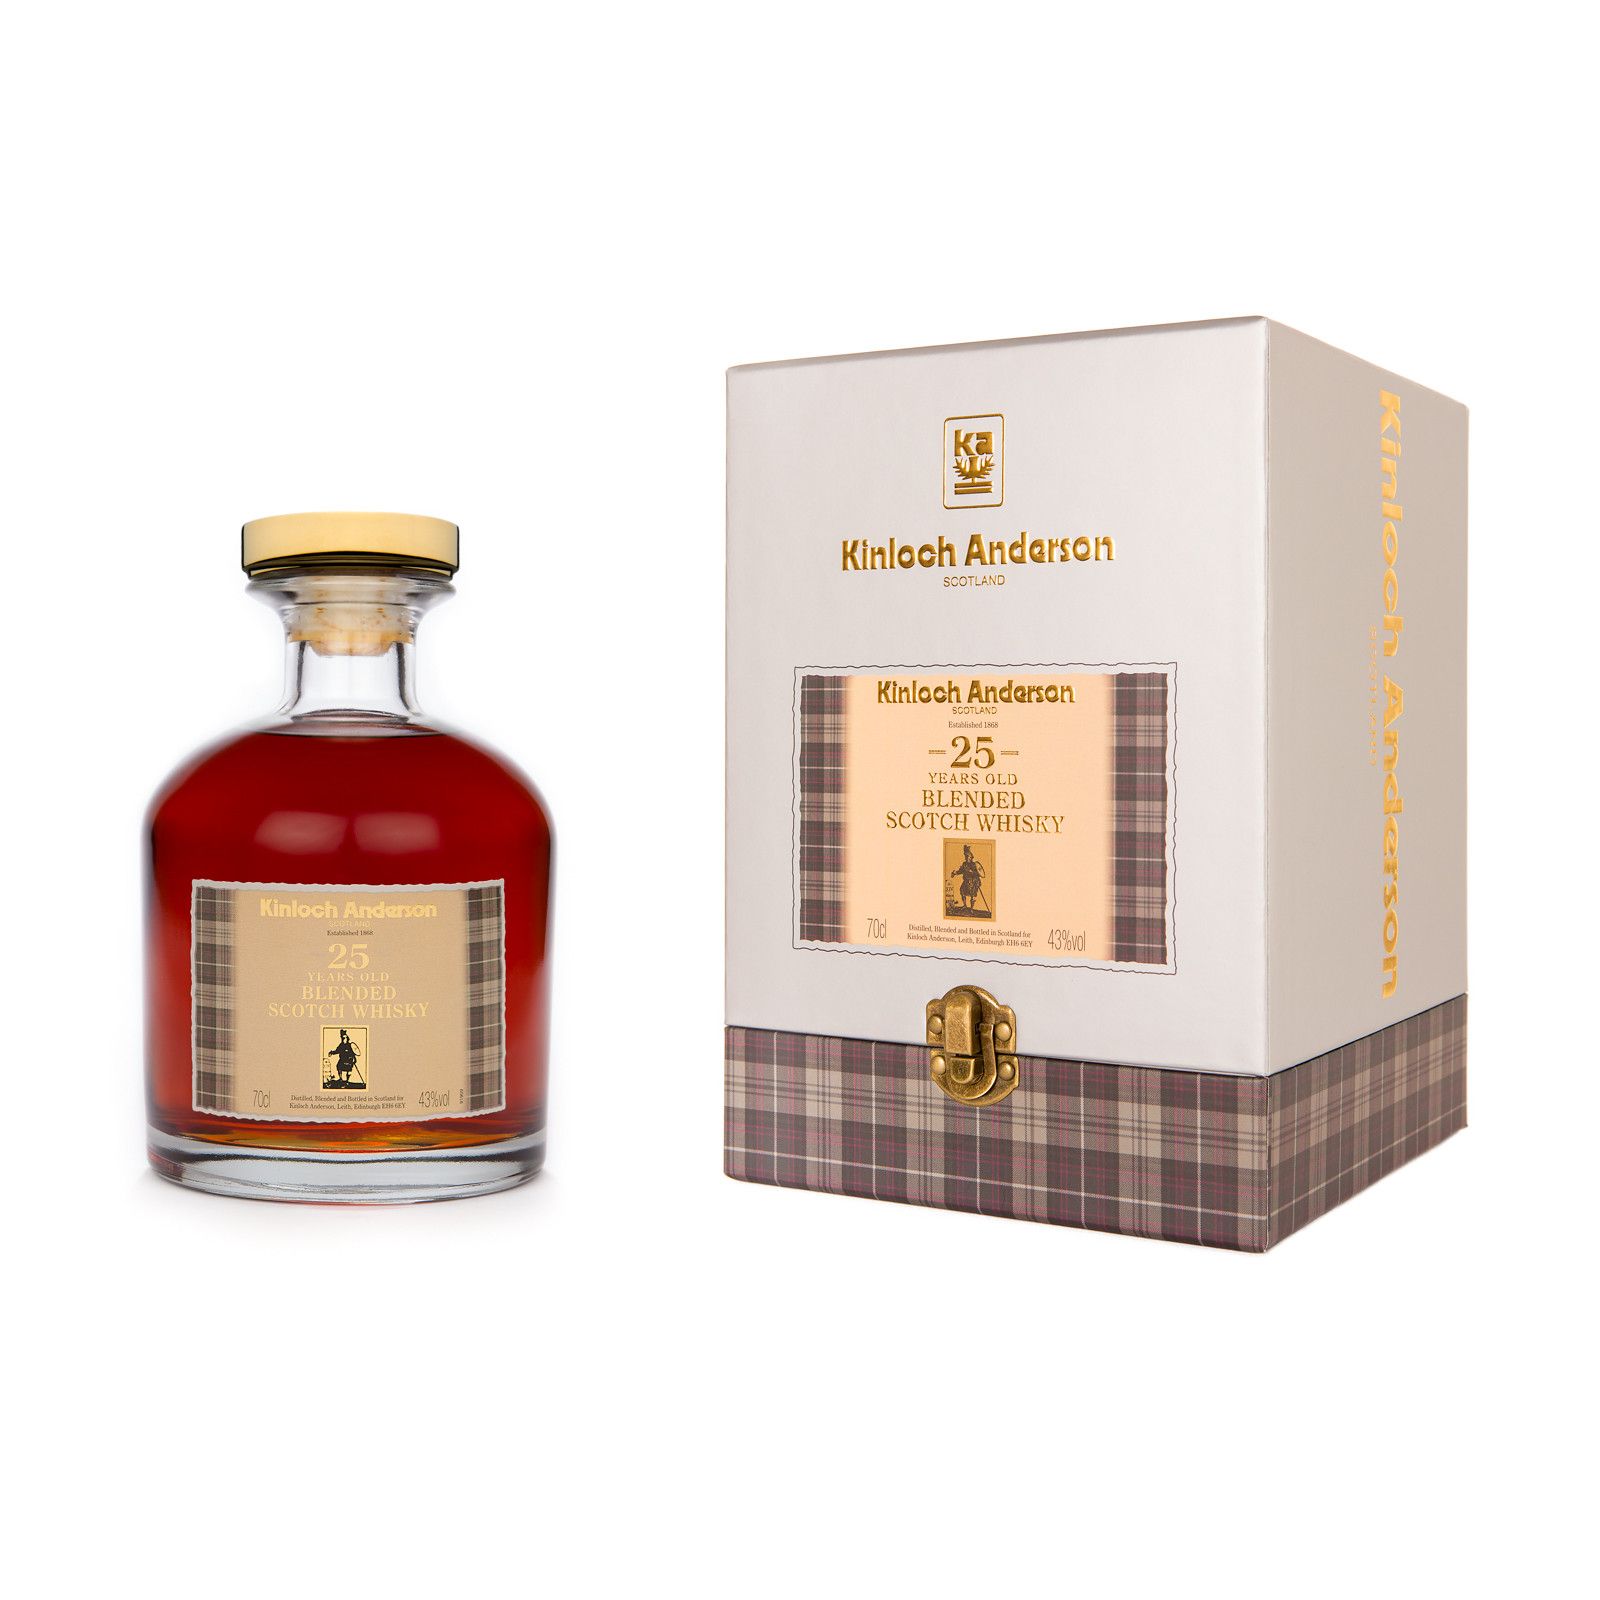 Kinloch-Anderson-25-Years-Old-Blended-Scotch-Whisky